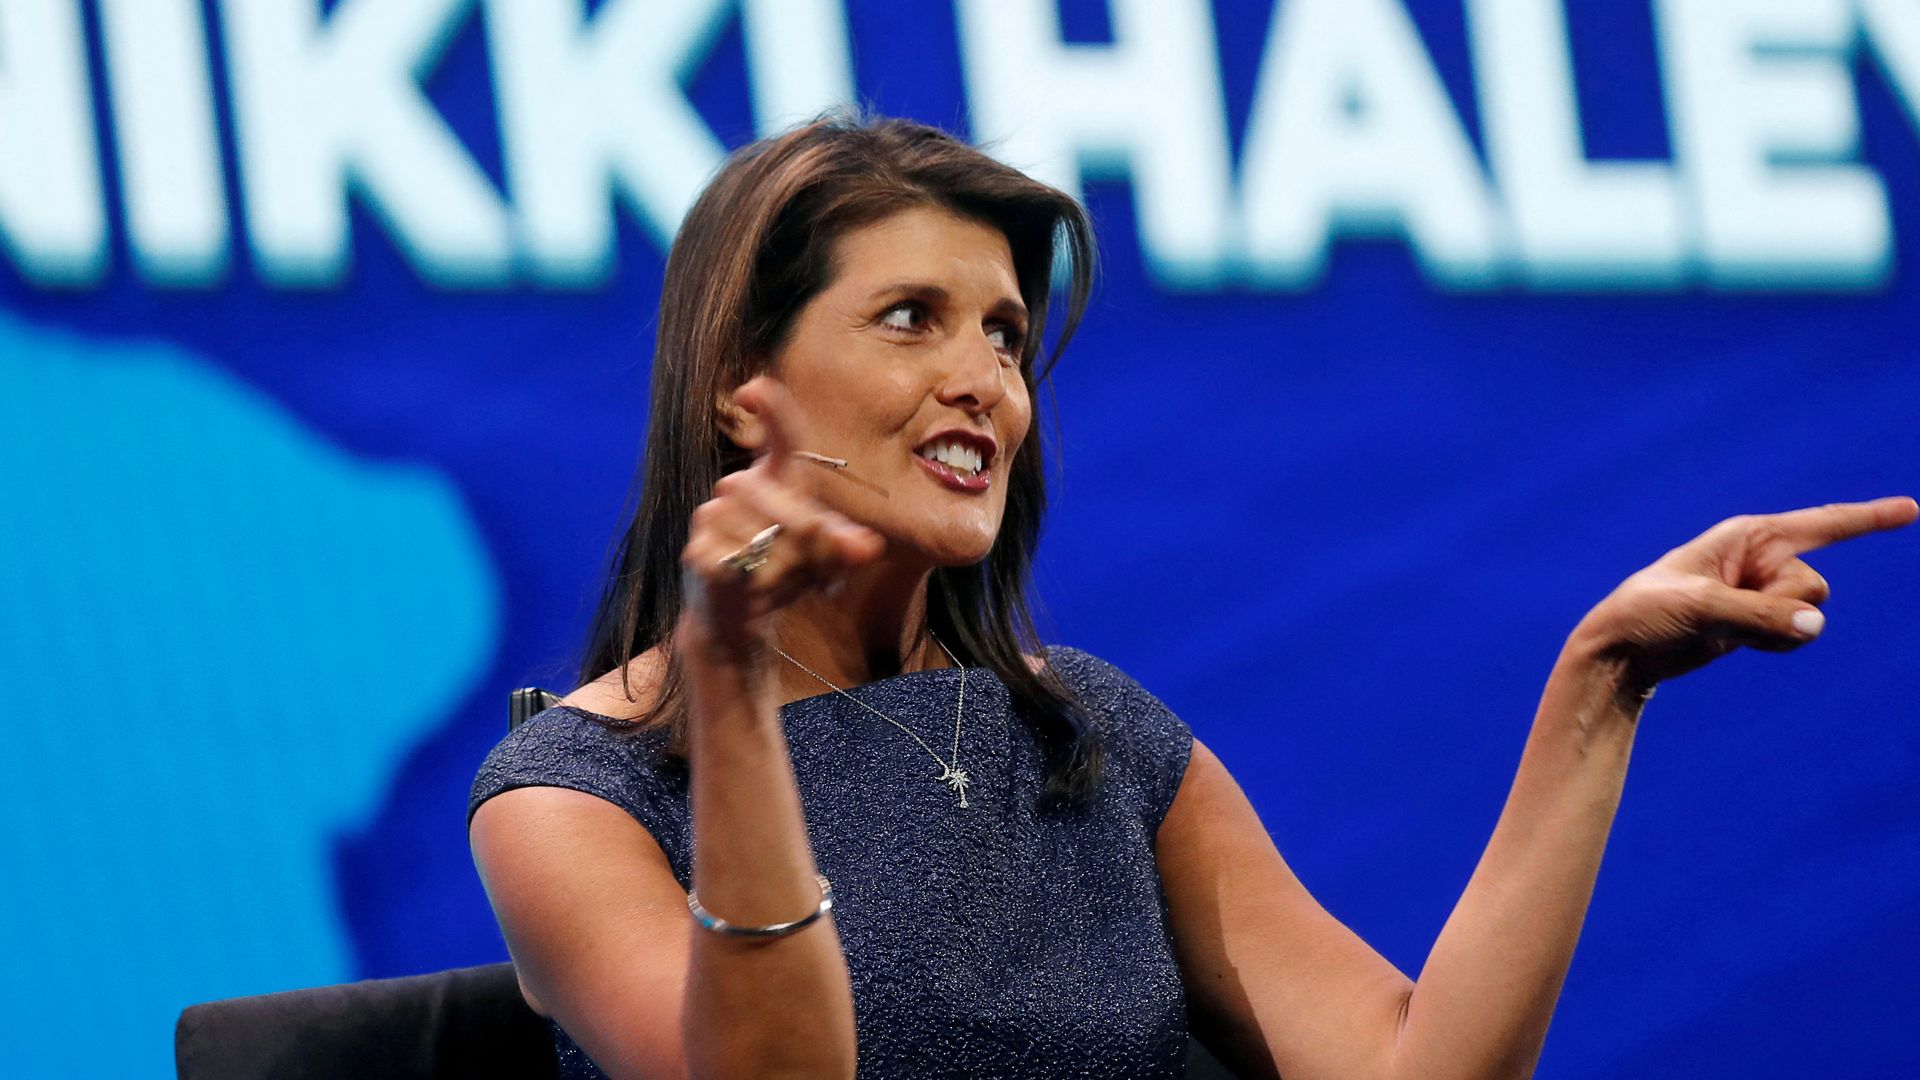 While the Hoosier State race was called for former President Trump, Nikki Haley pulled a notable share, bringing in 21.7 % of the vote.